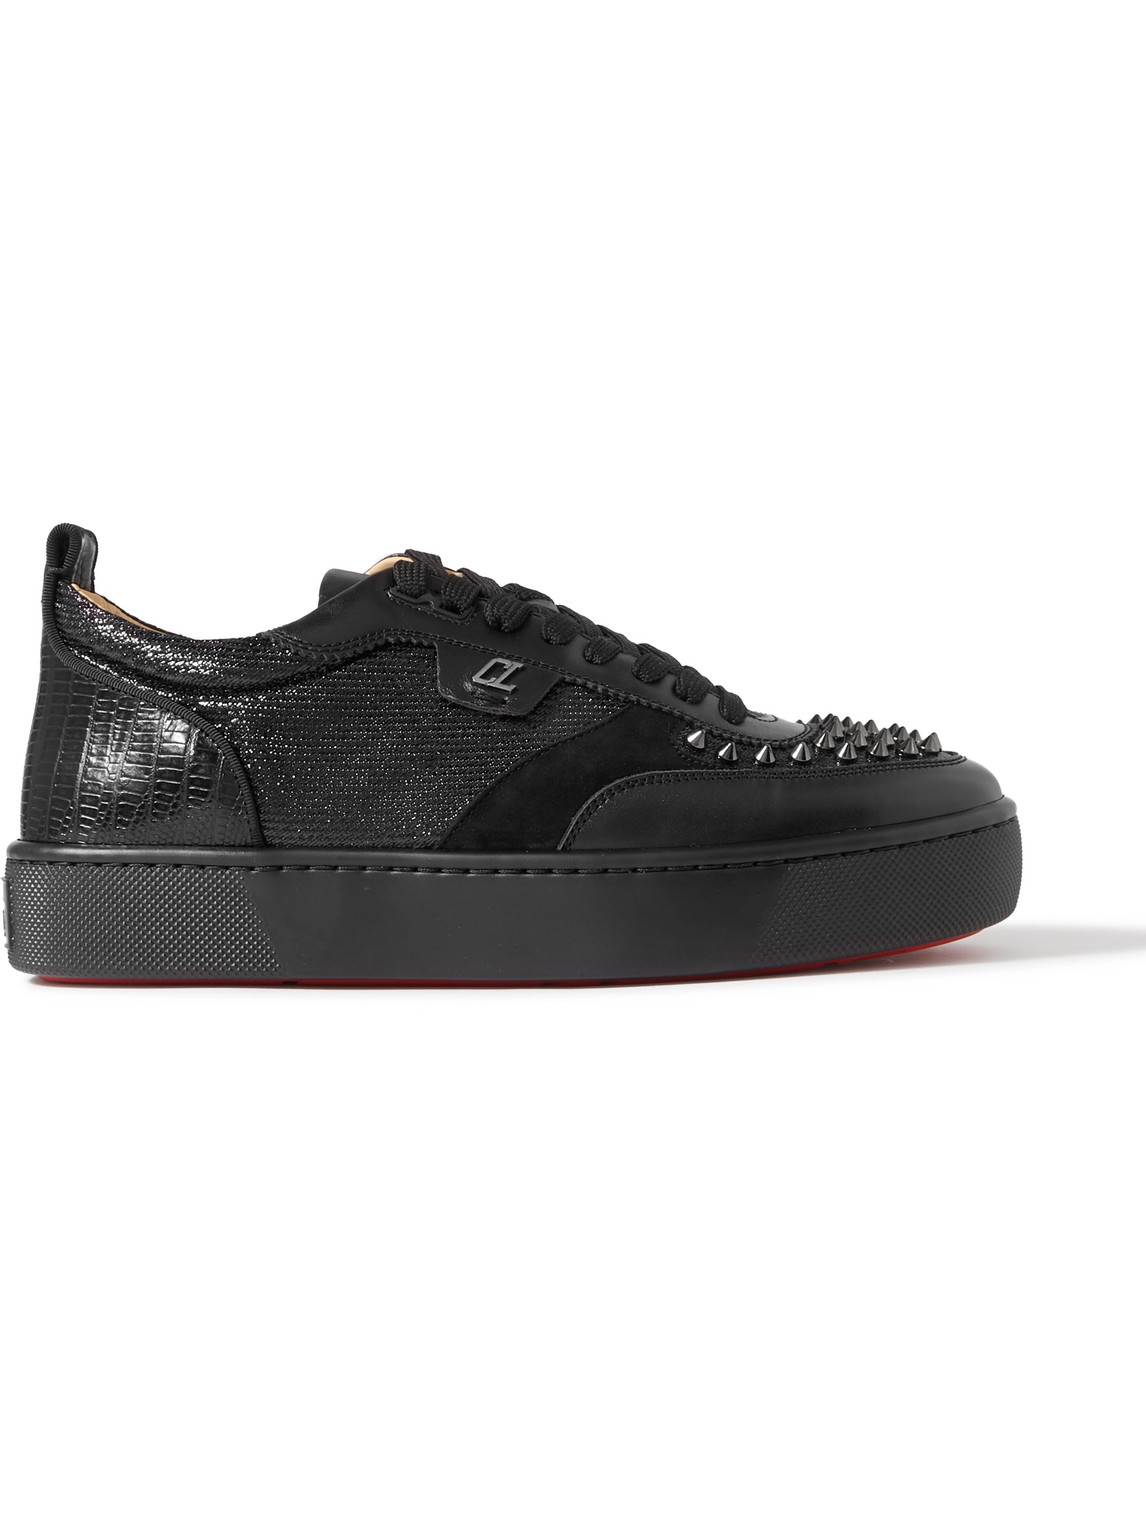 Christian Louboutin Happrui Spikes Suede And Leather-trimmed Mesh Trainers In Black